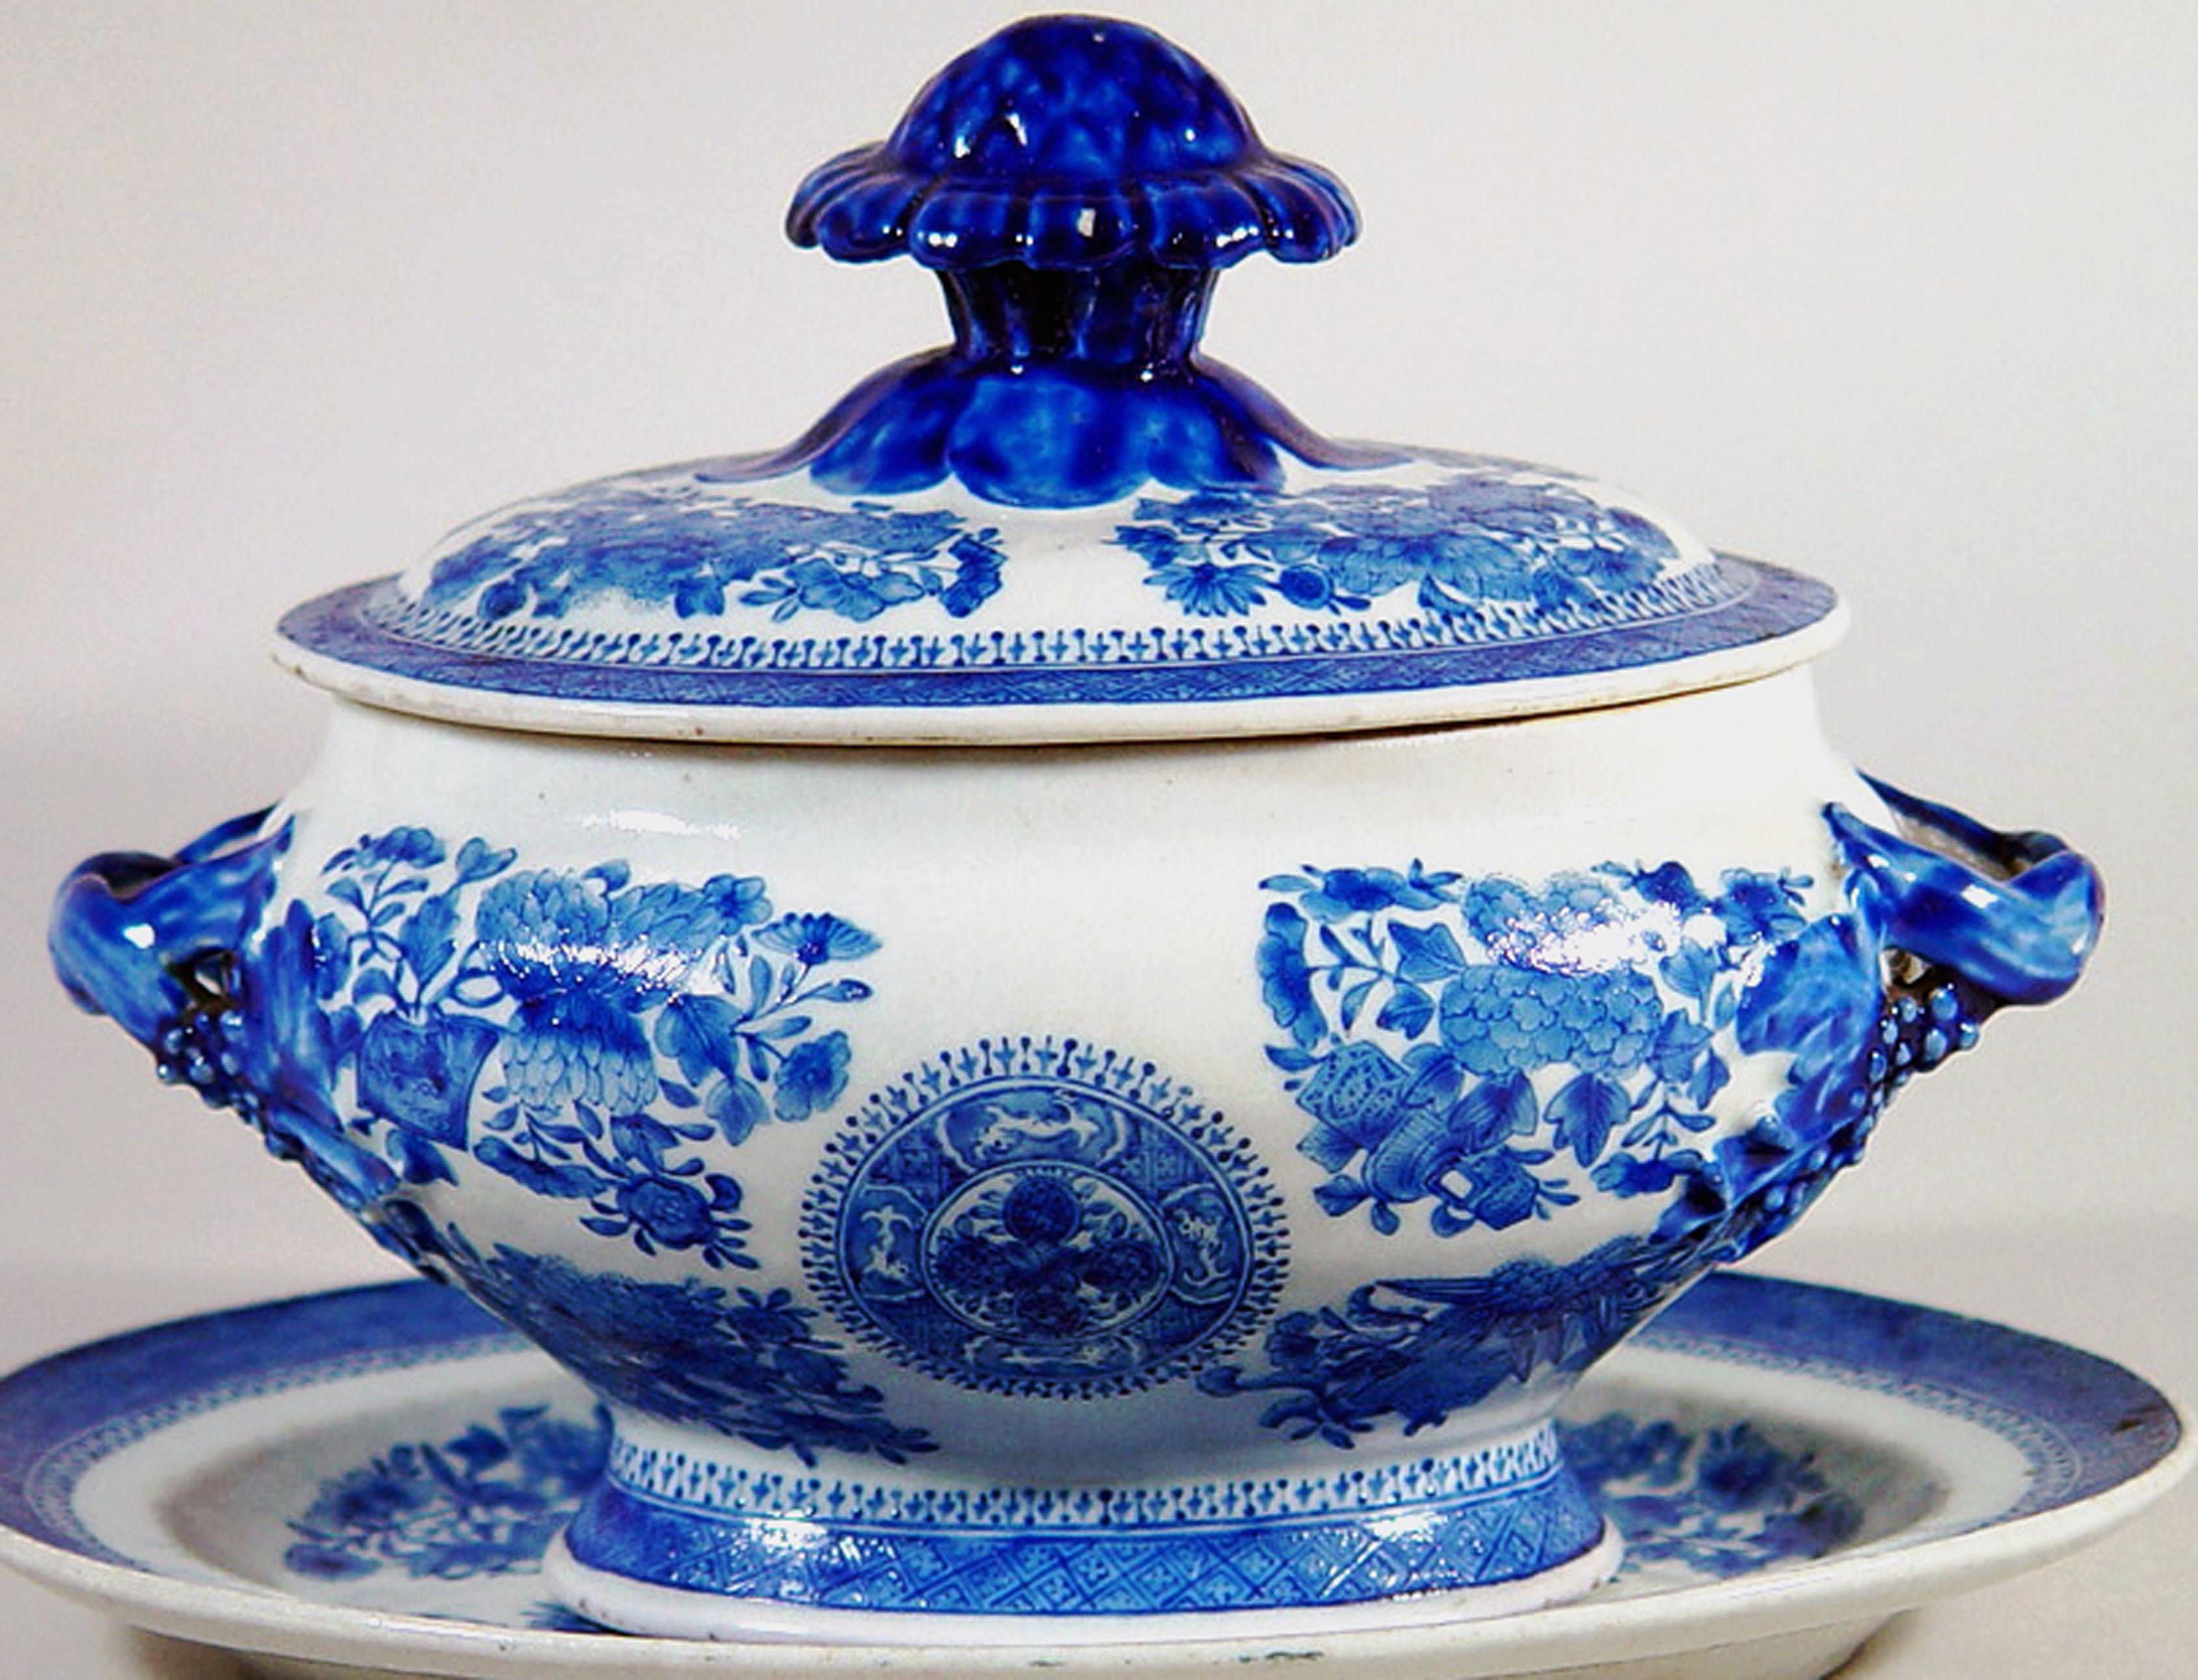 19th Century Chinese Export Rare Blue Enamel Fitzhugh Porcelain Sauce Tureen, Cover and Stand